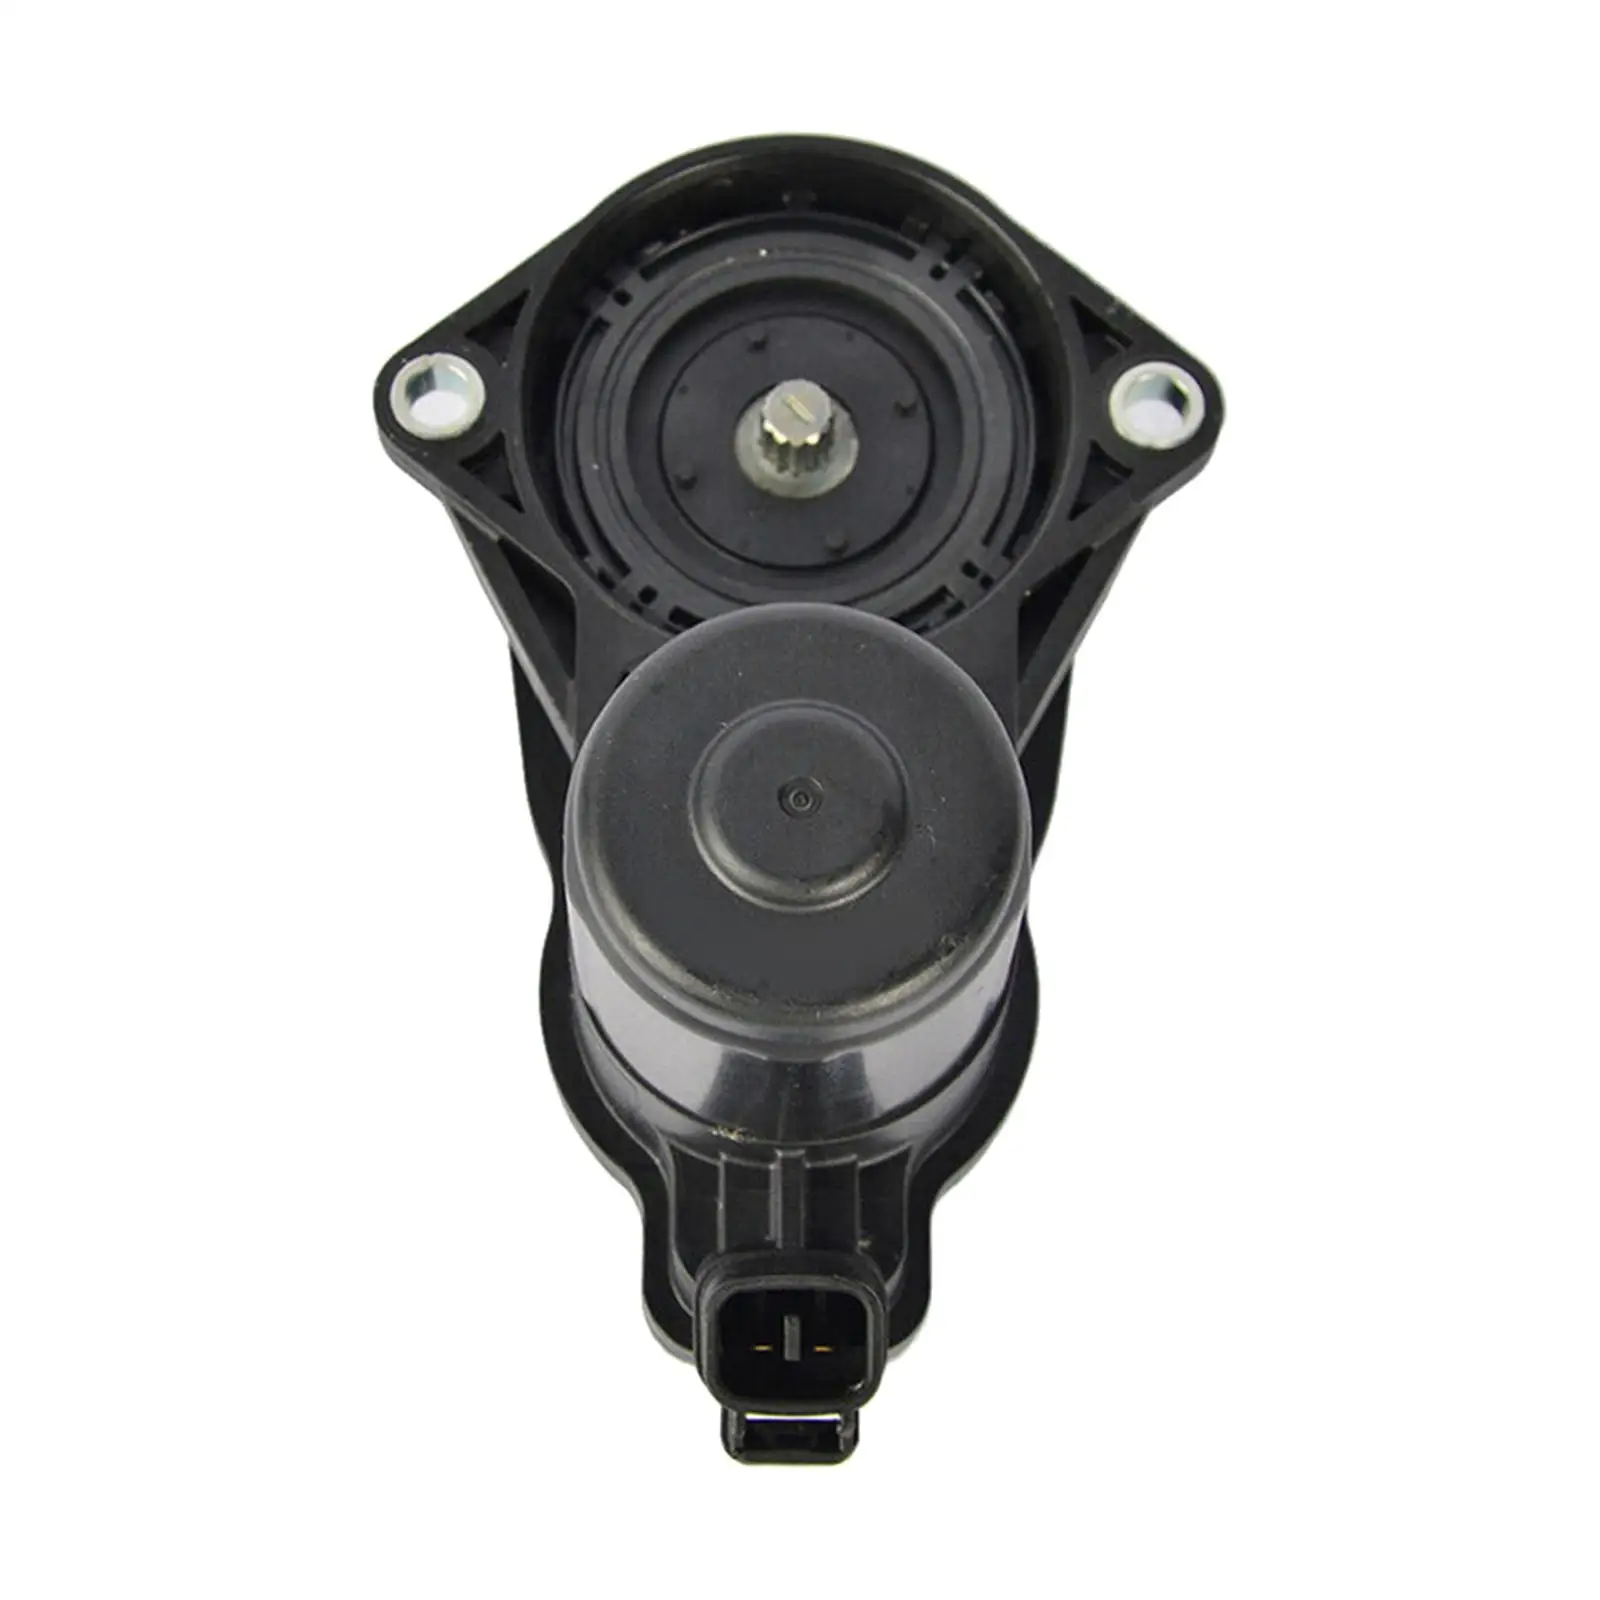 Parking Brake Actuator 46310-33010 Automotive Replacement Part replacement for toyota for c-hr Venza Premium